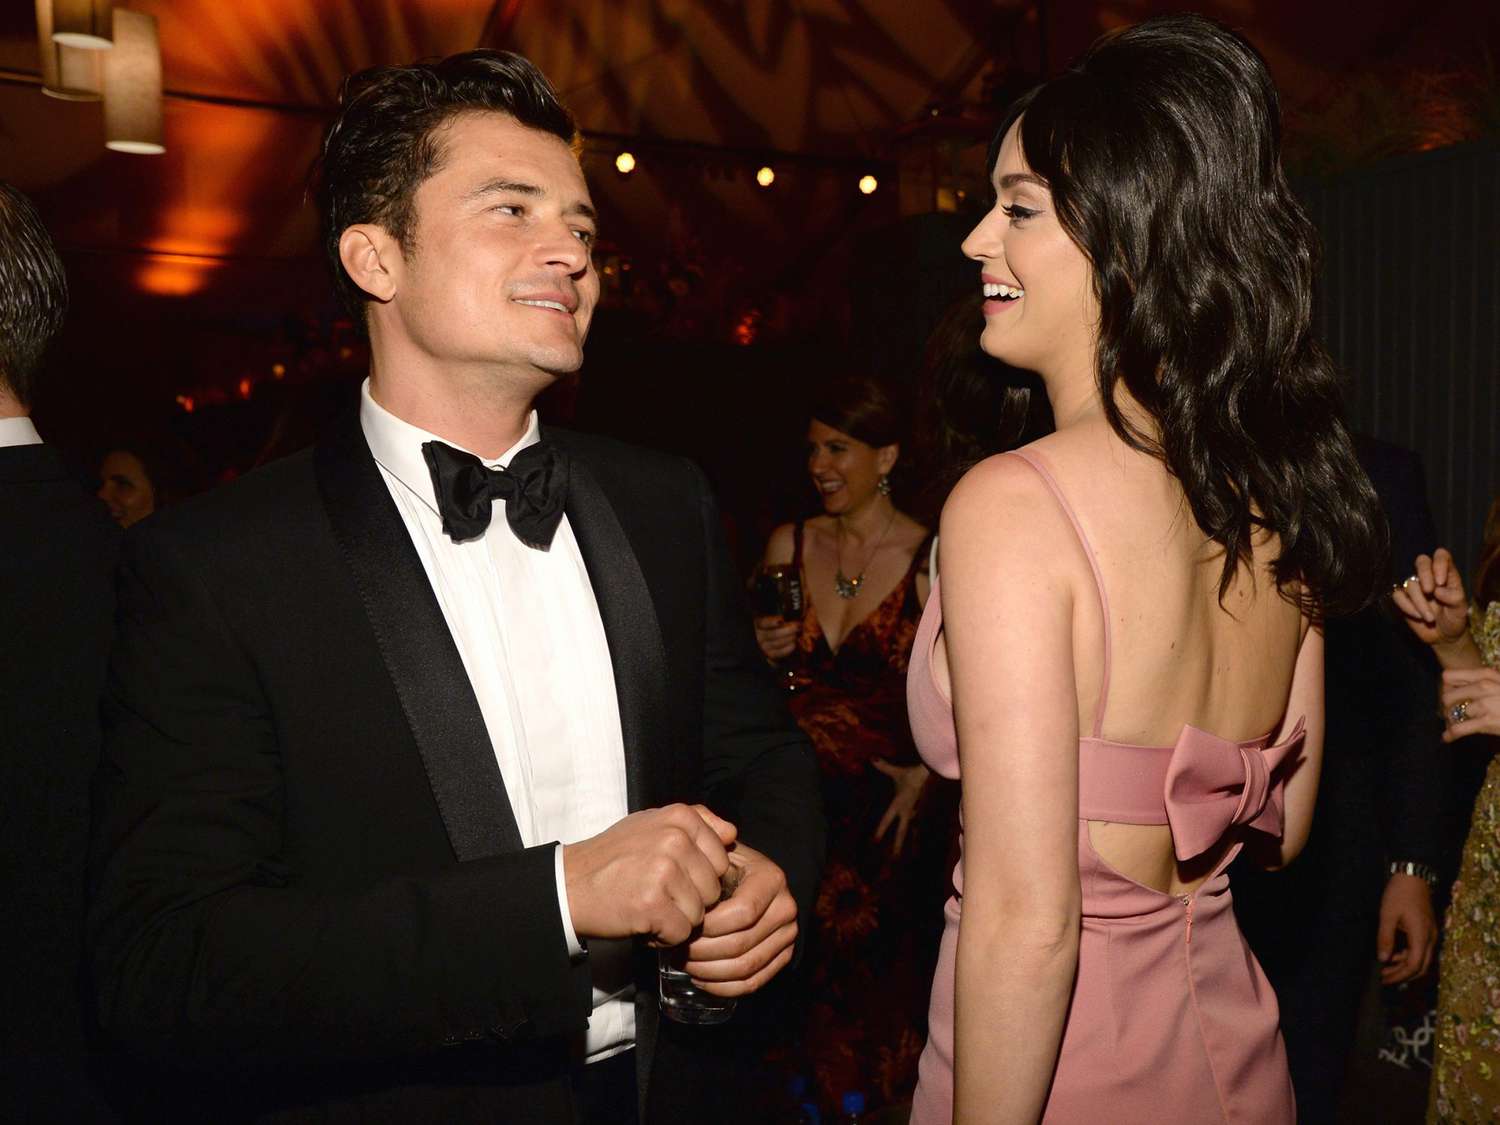 Orlando Bloom With Katy Perry at The Weinstein Company and Netflix's Golden Globe Party in Beverly Hills on January 10, 2016